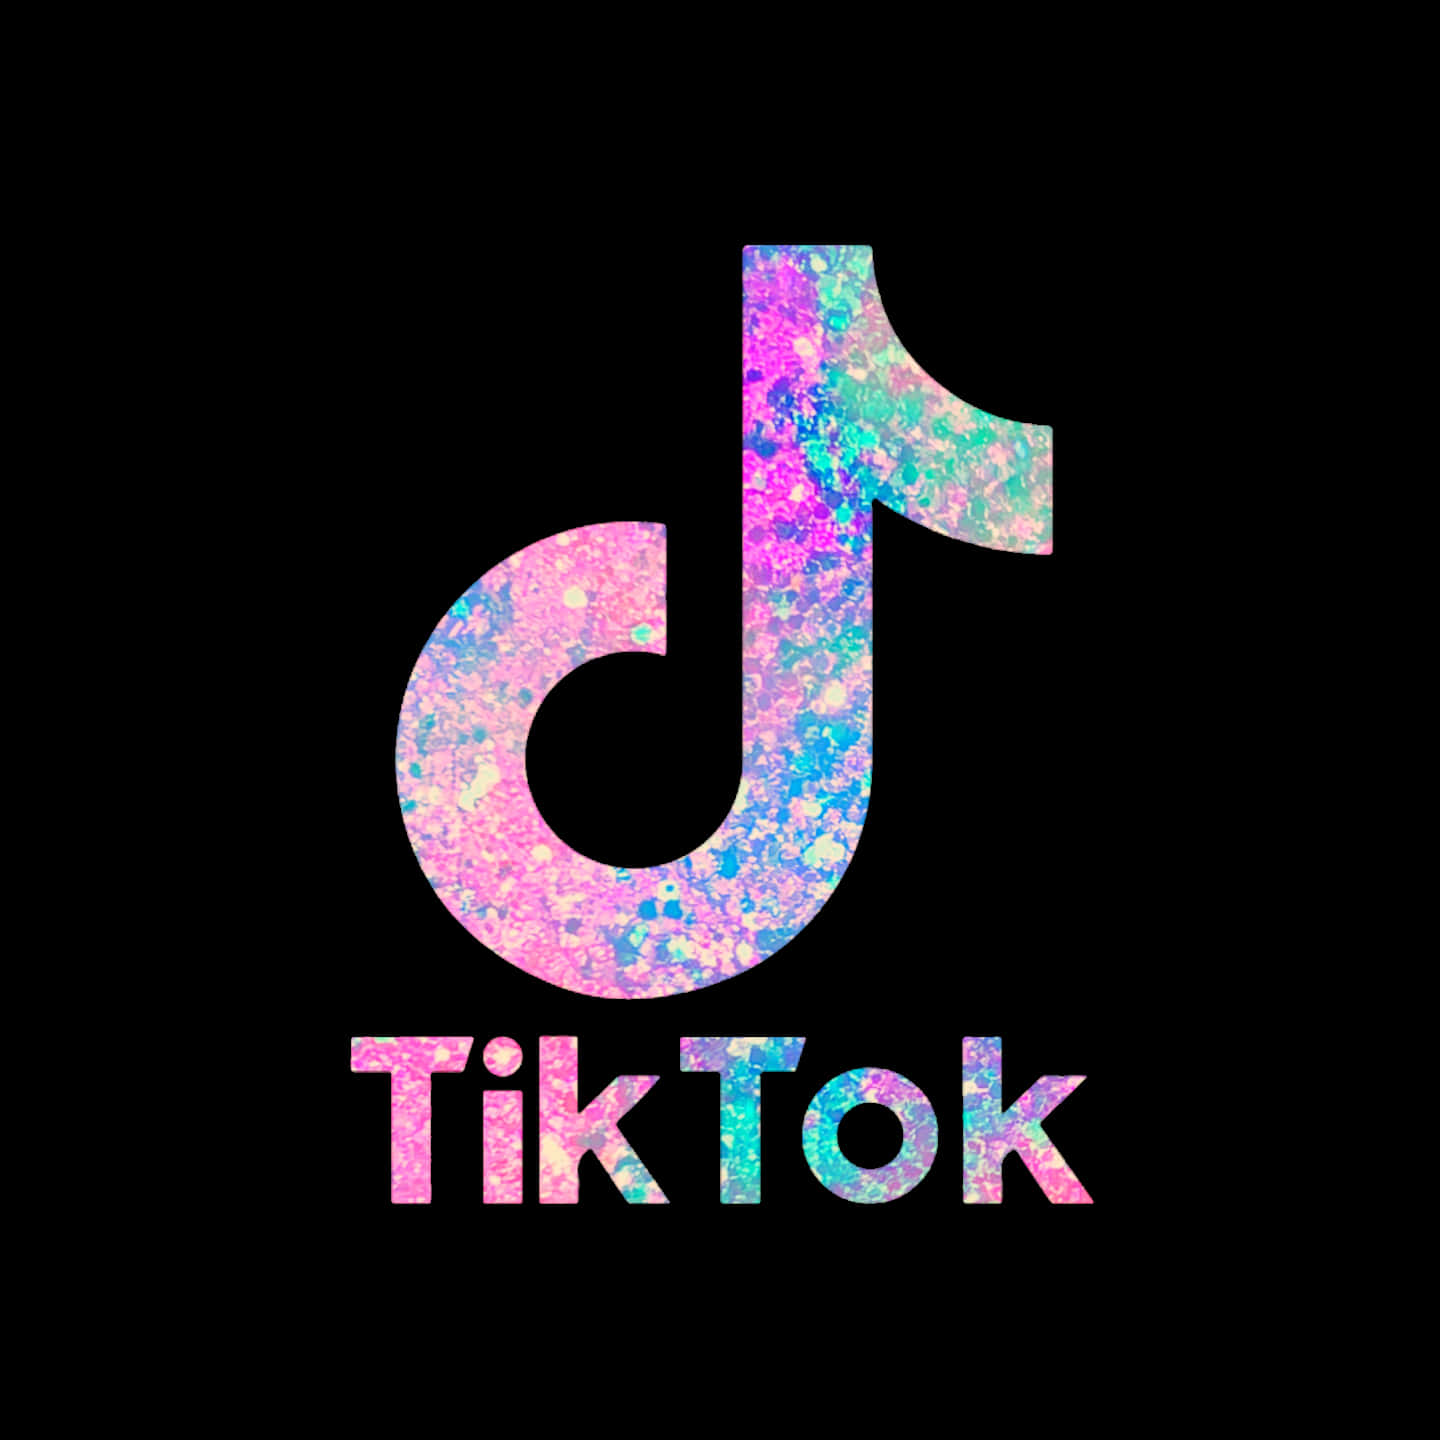 tiktok logo with a pink and blue glitter